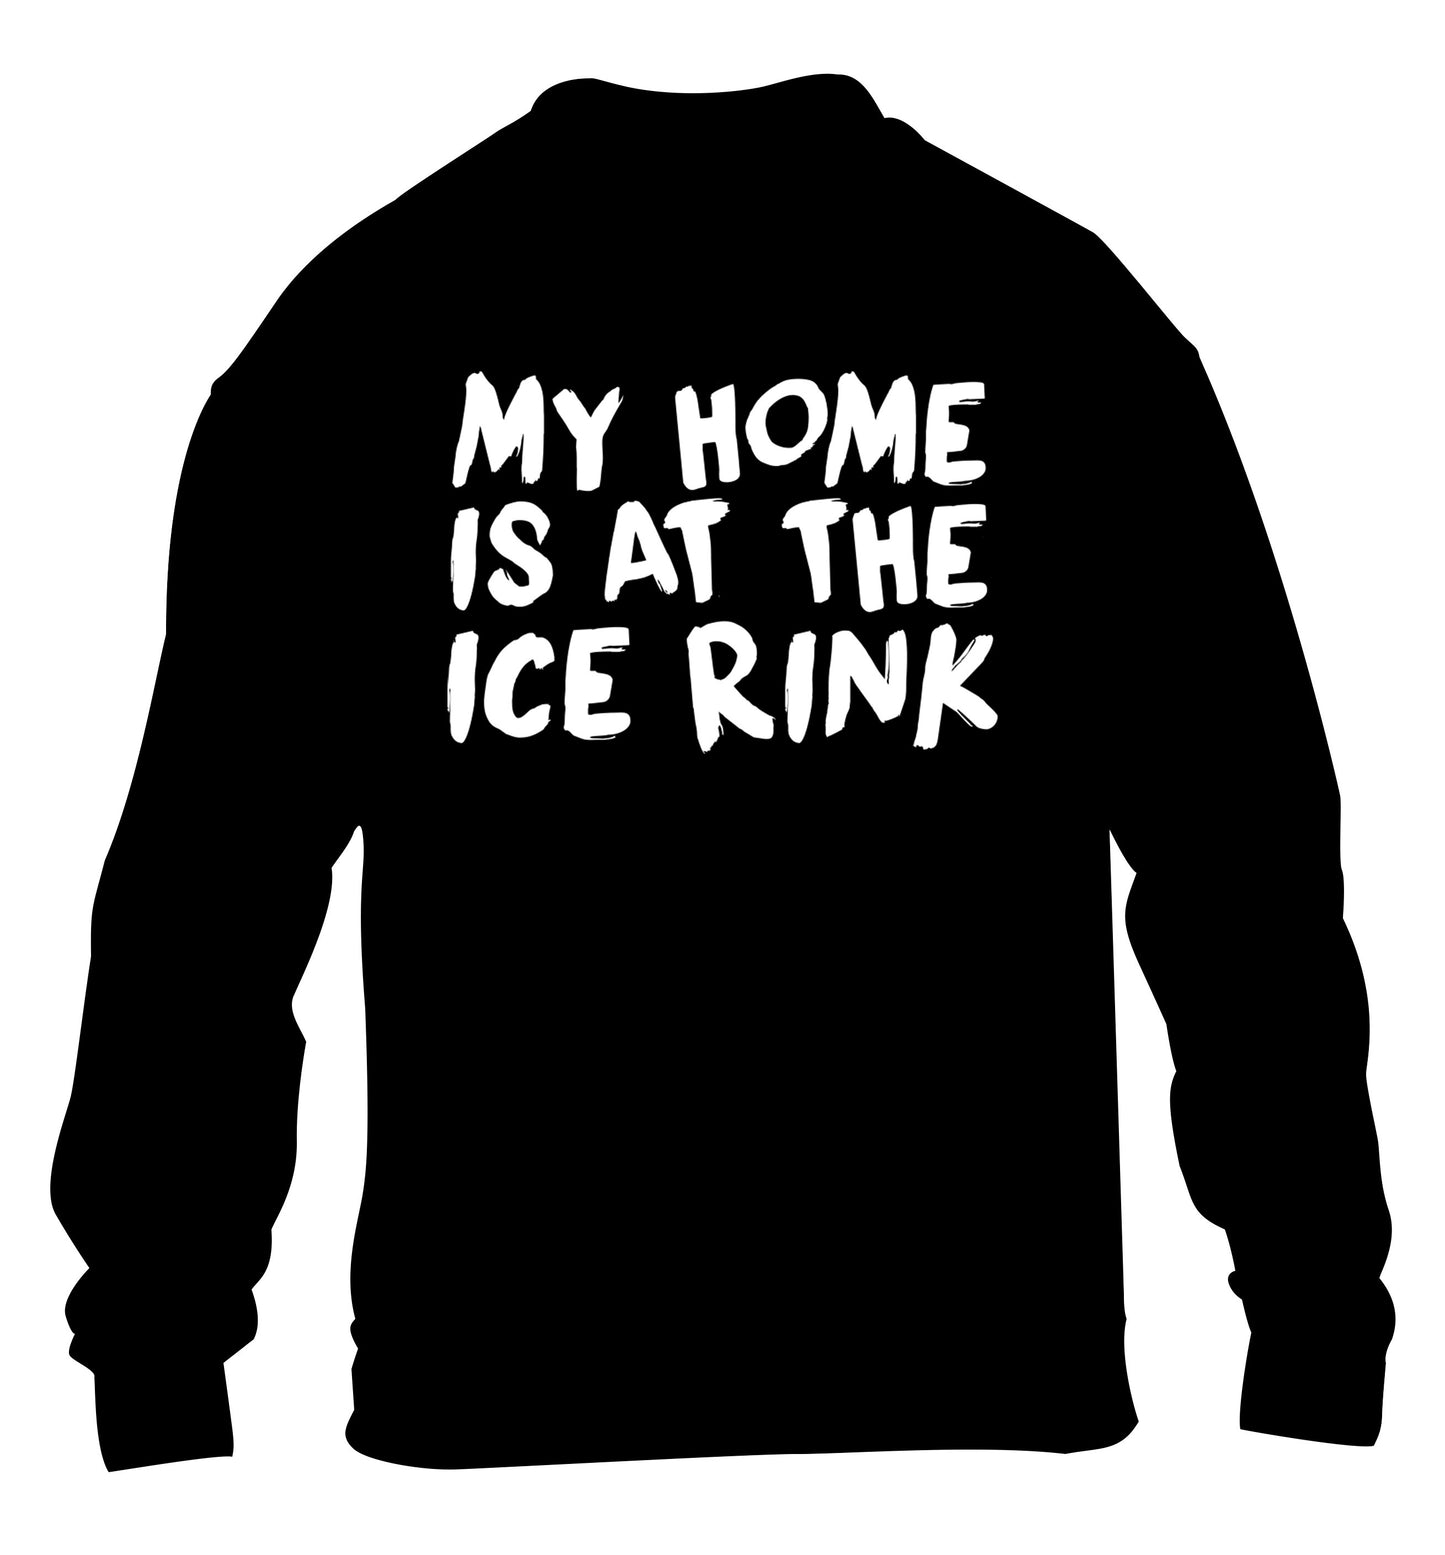 My home is at the ice rink children's black sweater 12-14 Years